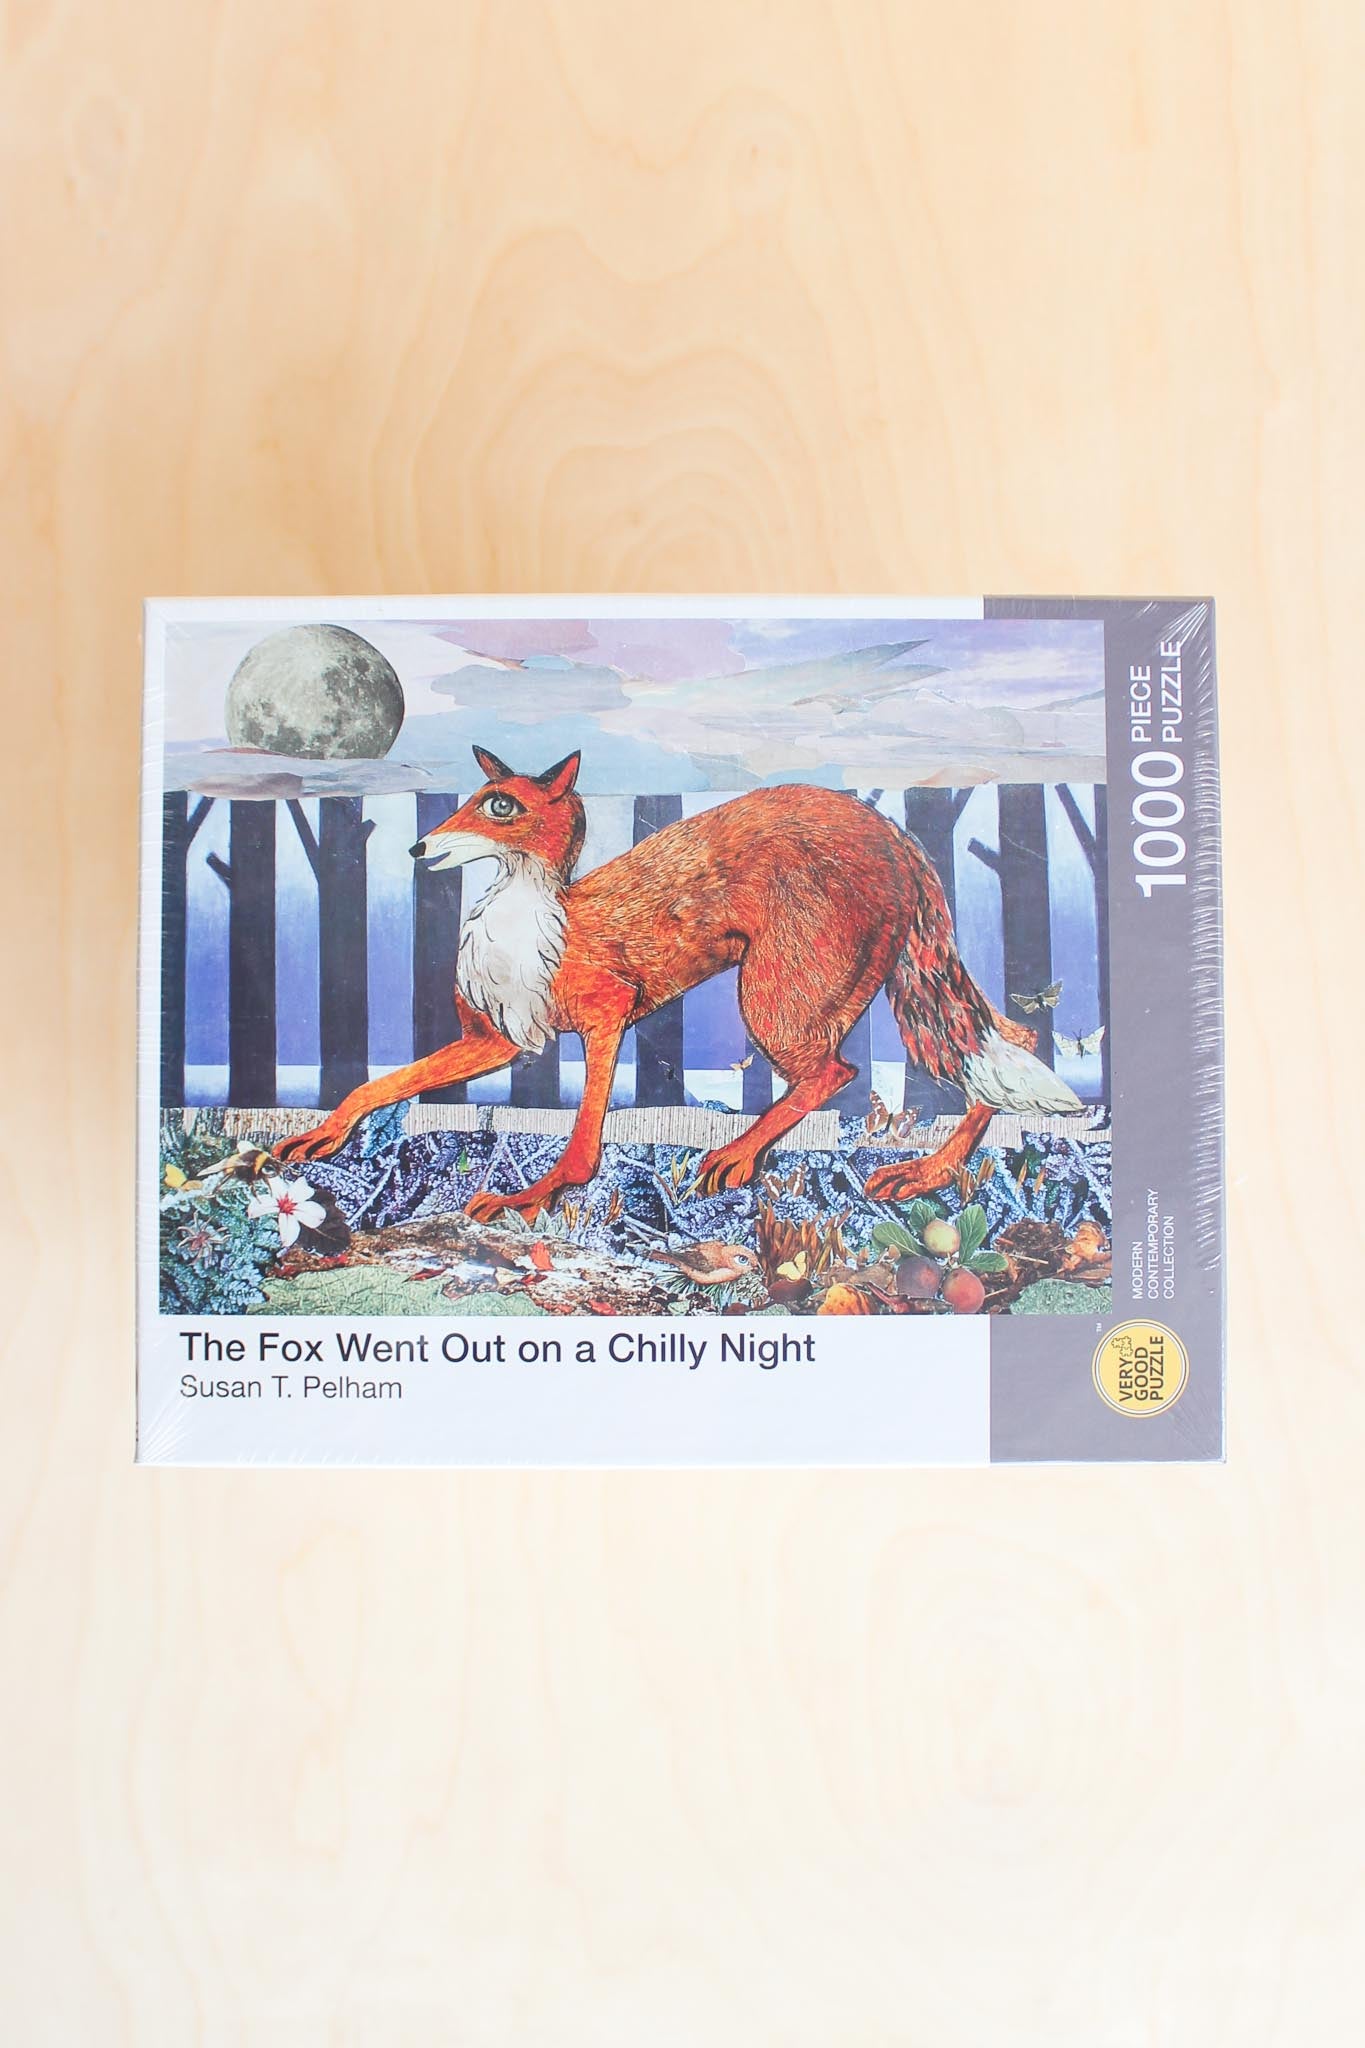 Susan T. Pelham - The Fox Went Out on a Chilly Night 1000 piece puzzle